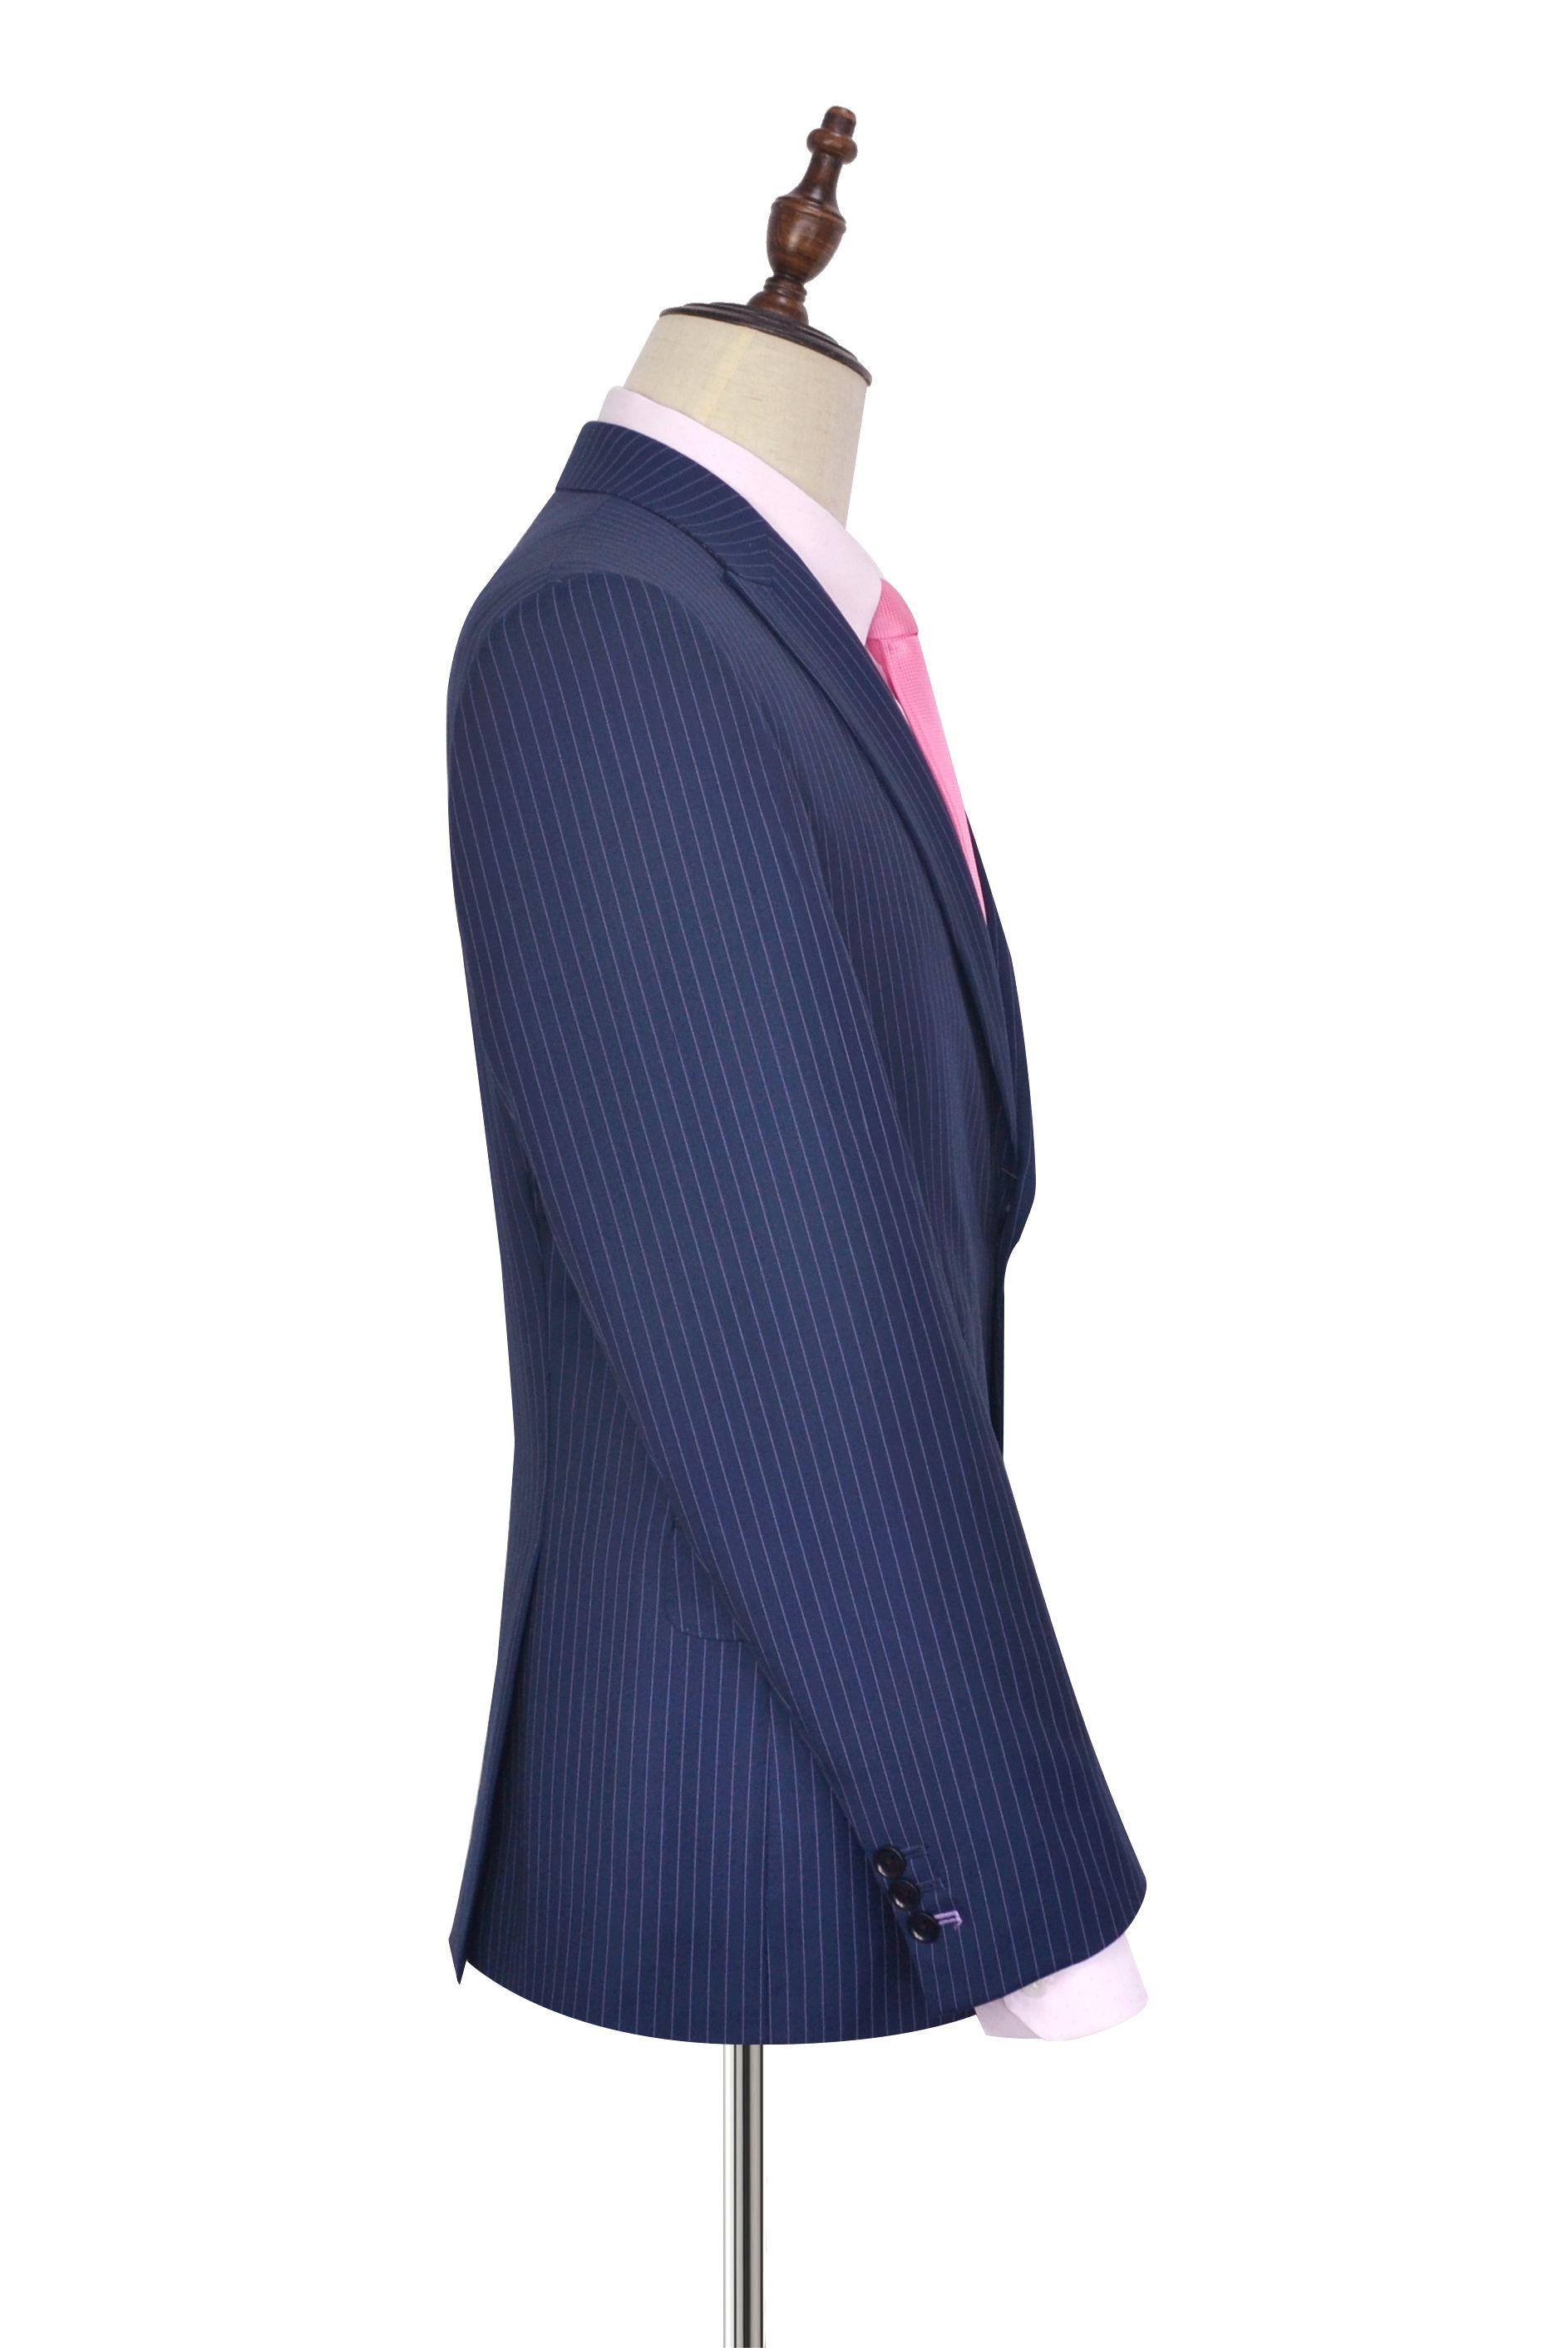 Blue vertical stripes wool Peak lapel high-end tailored suit for office